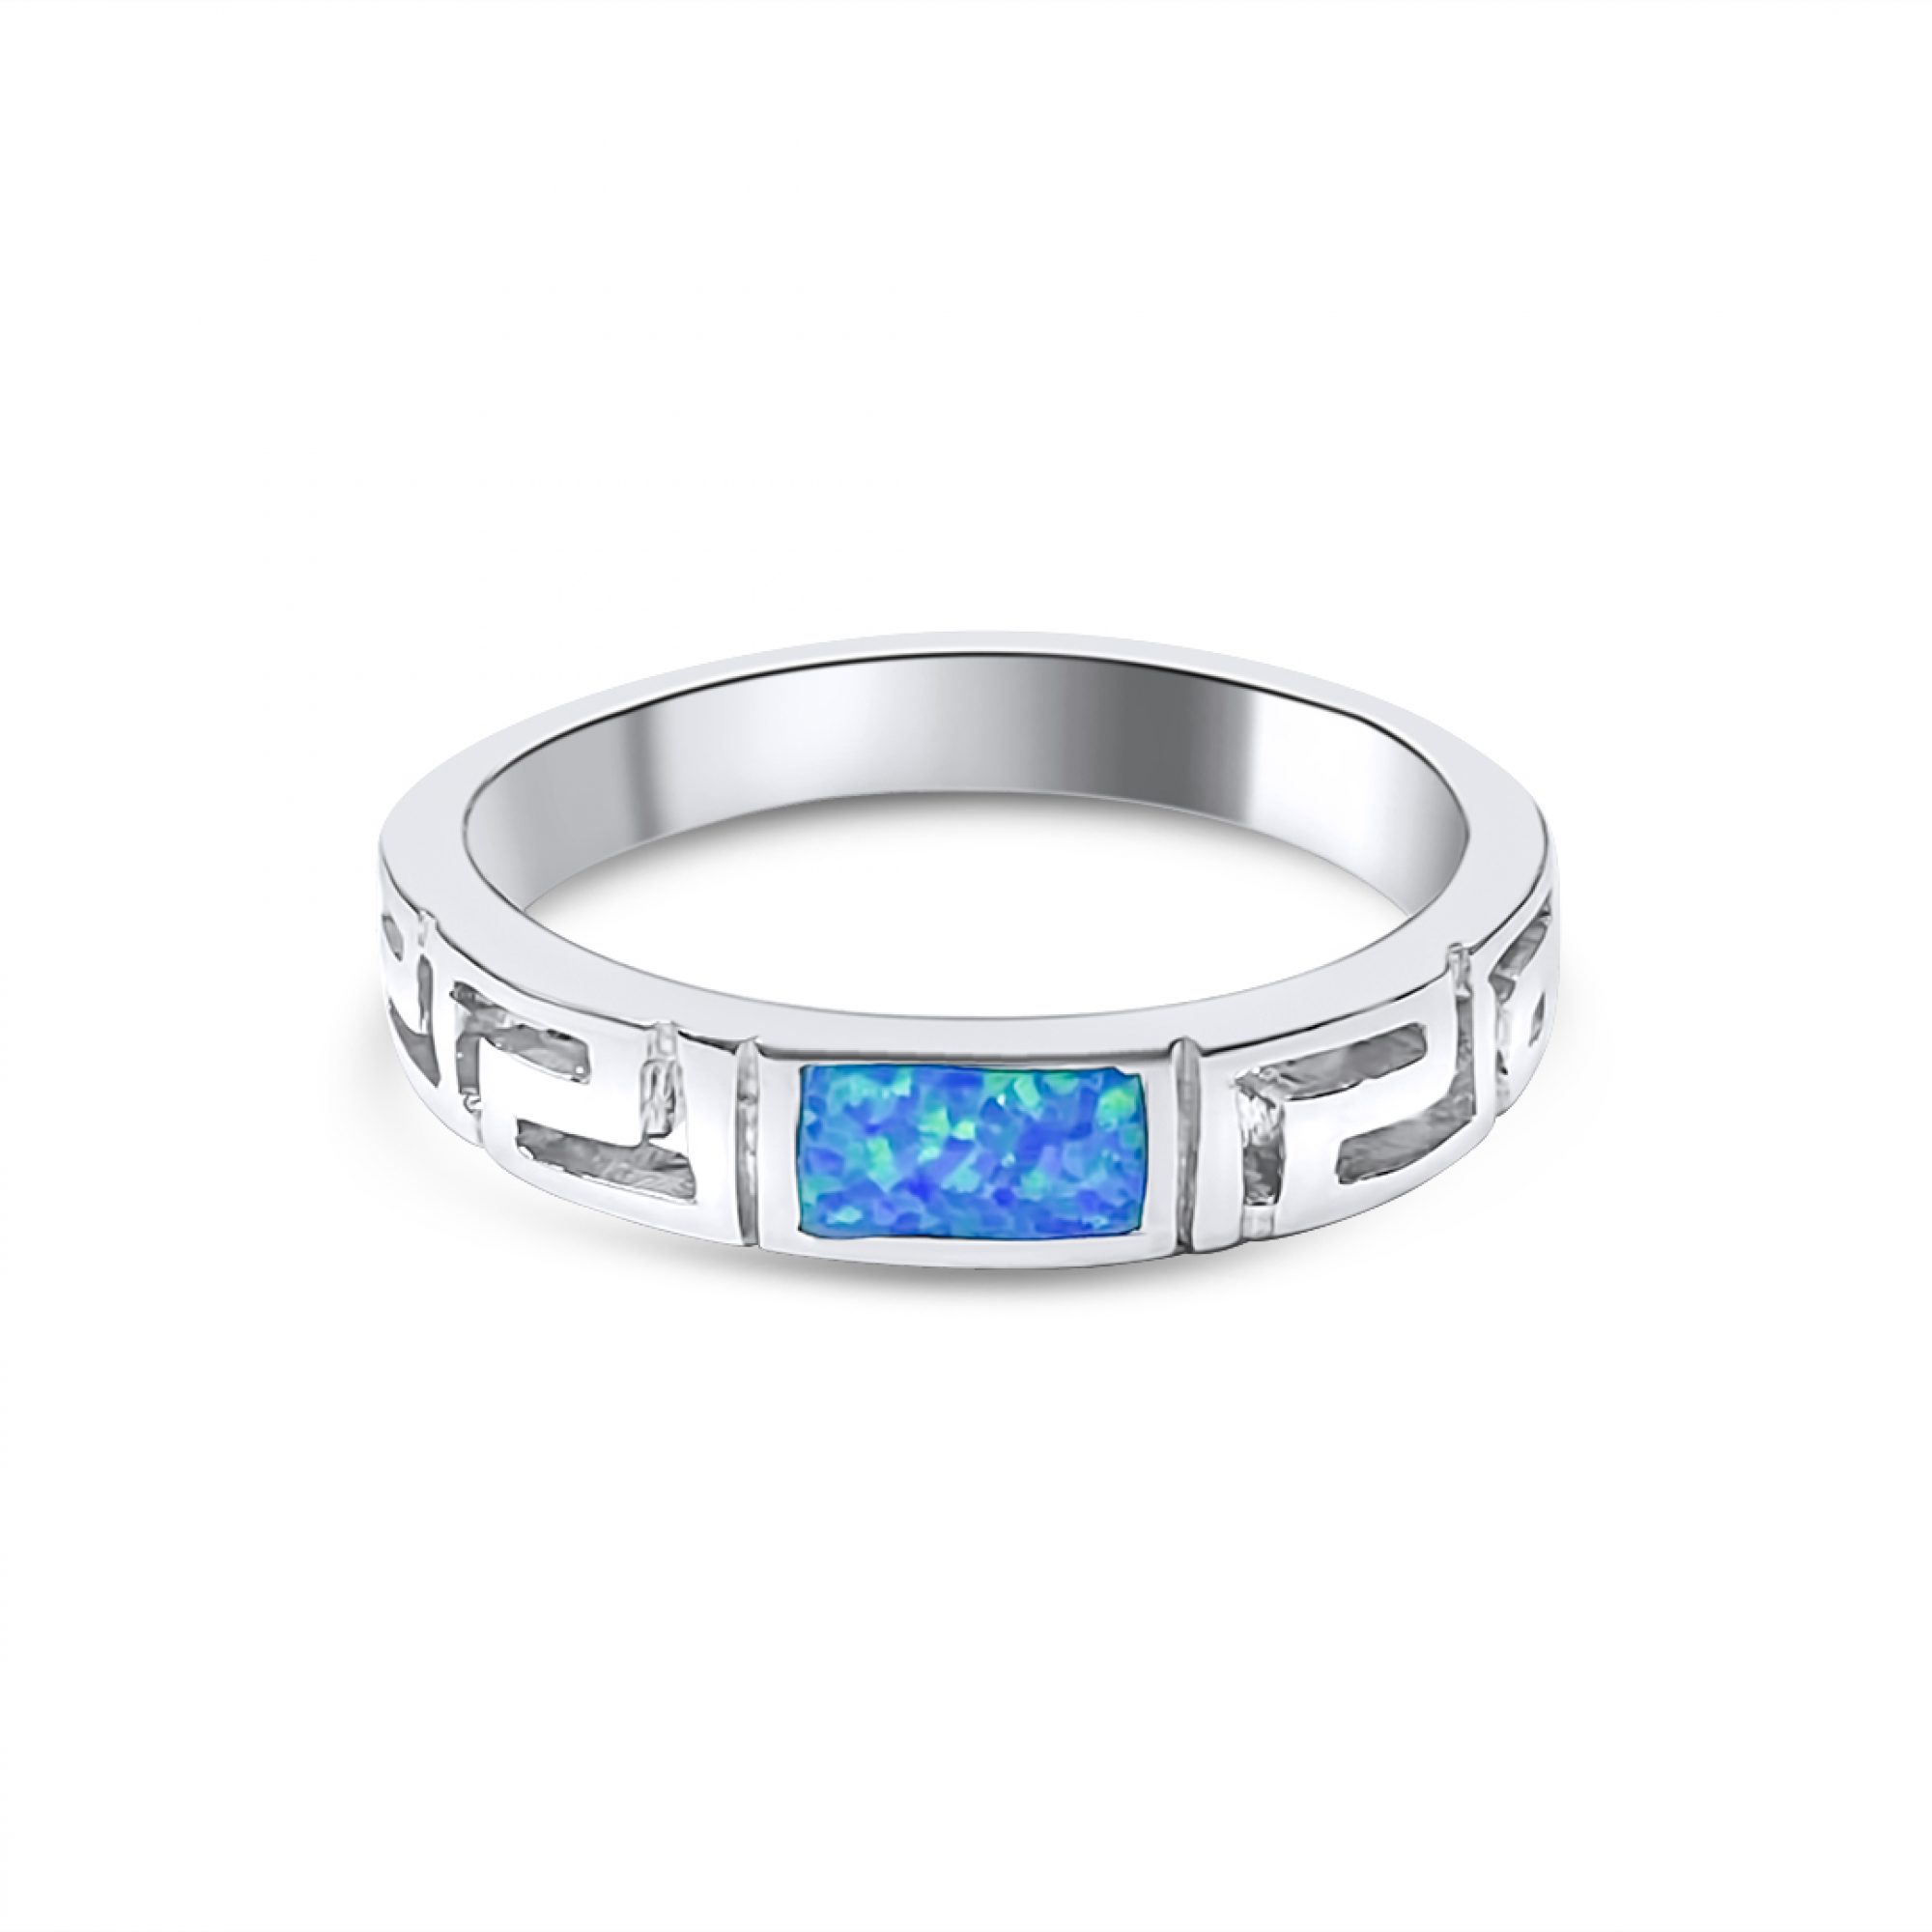 Silver ring with opal stone and meander